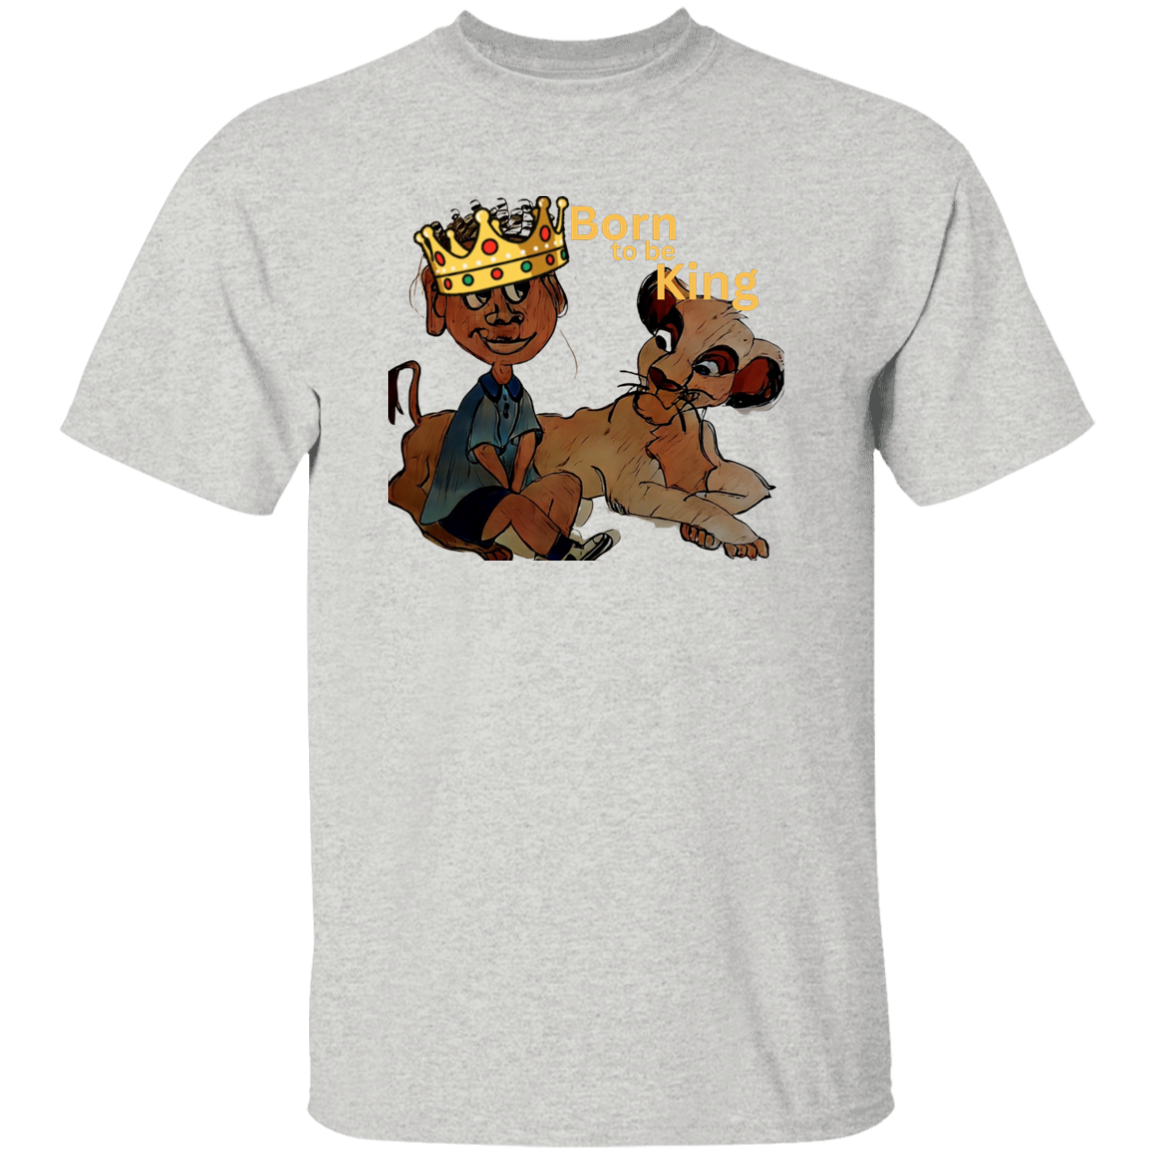 Born to be King Youth 5.3 oz 100% Cotton T-Shirt